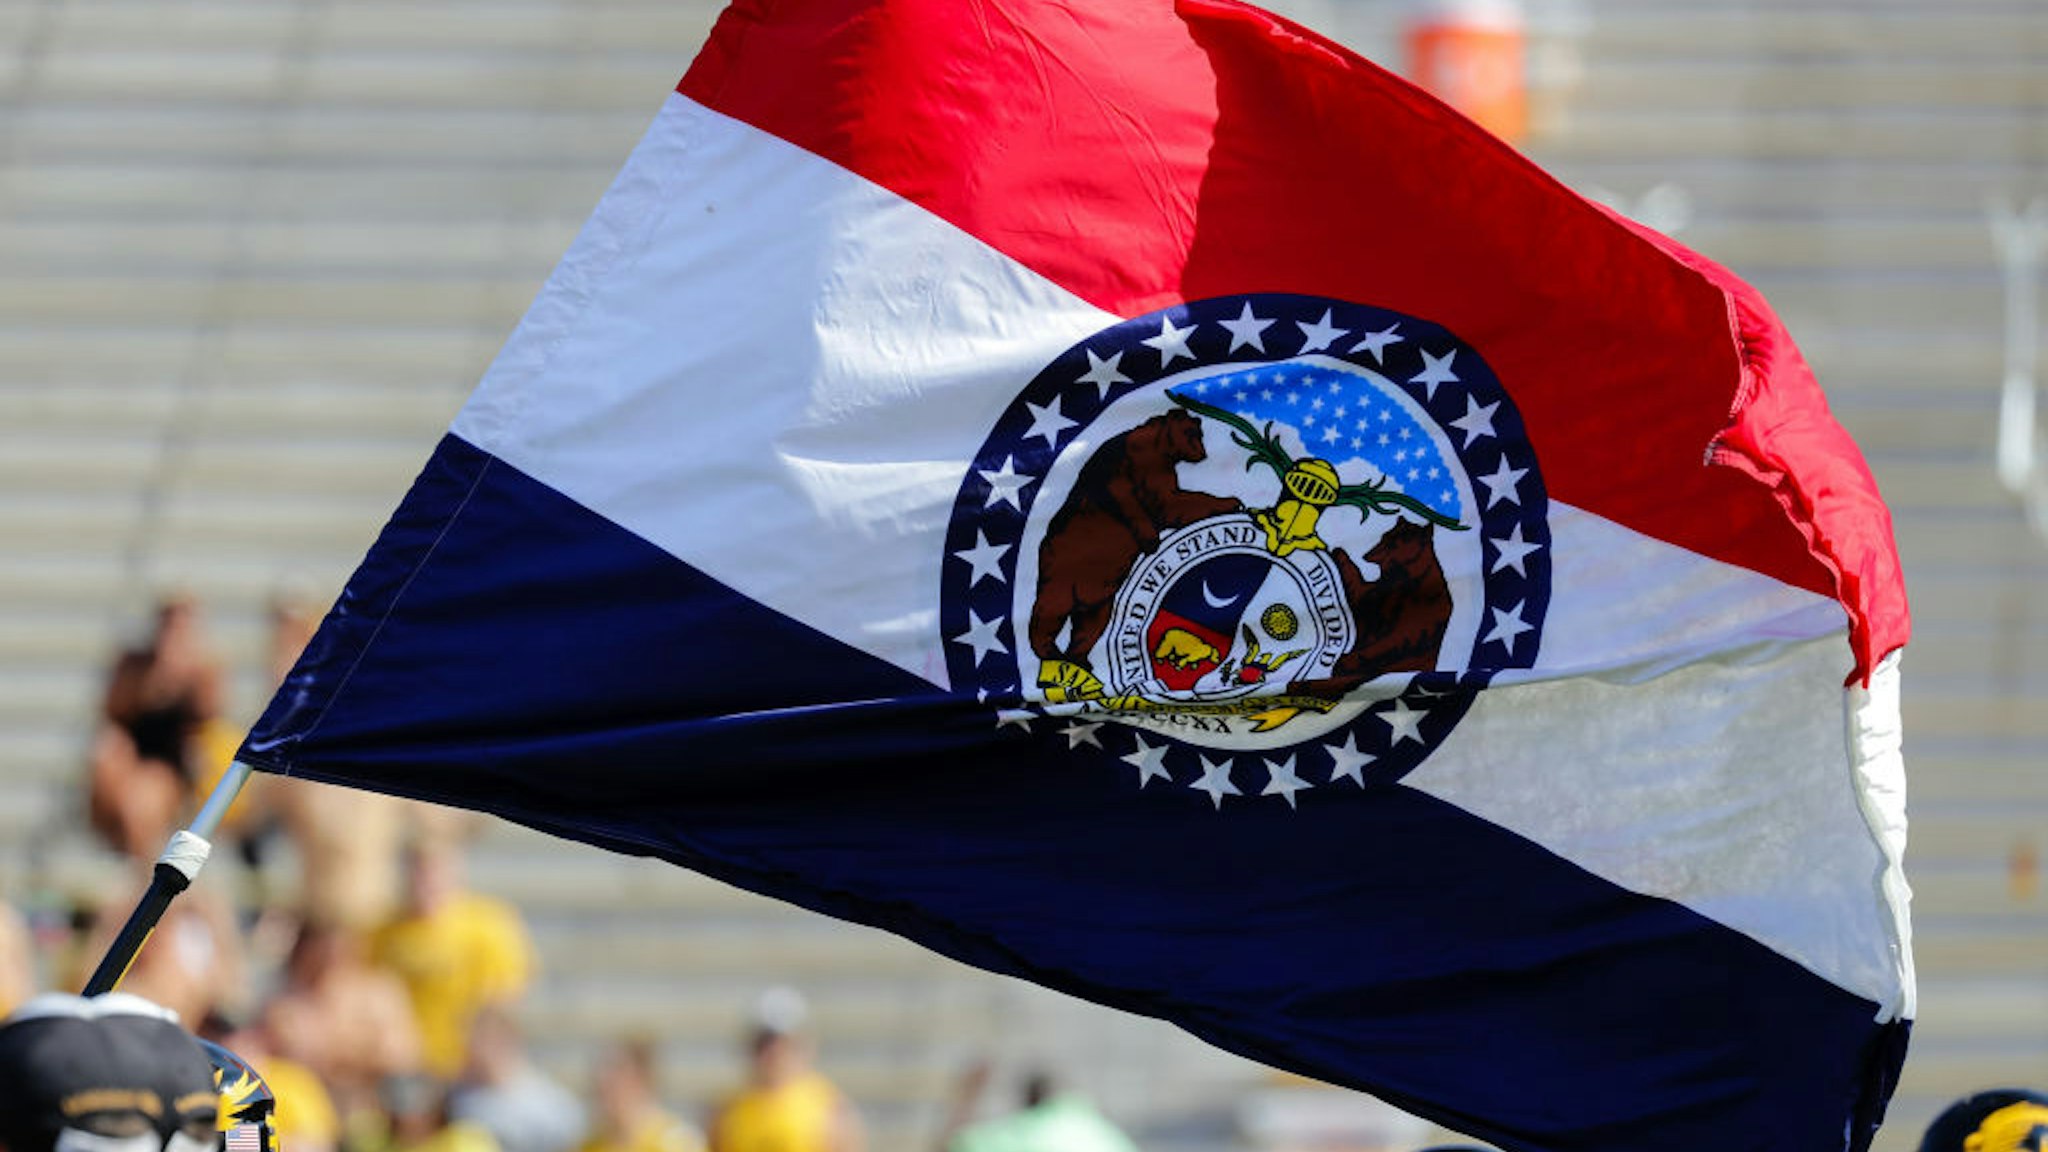 The State Flag of Missouri leads the Missouri Tigers' onto the field prior to the start of the first half of the Purdue Boilermakers game at the Missouri Tigers on September 16, 2017, at Memorial Stadium on Faurot Field in Columbia, MO.